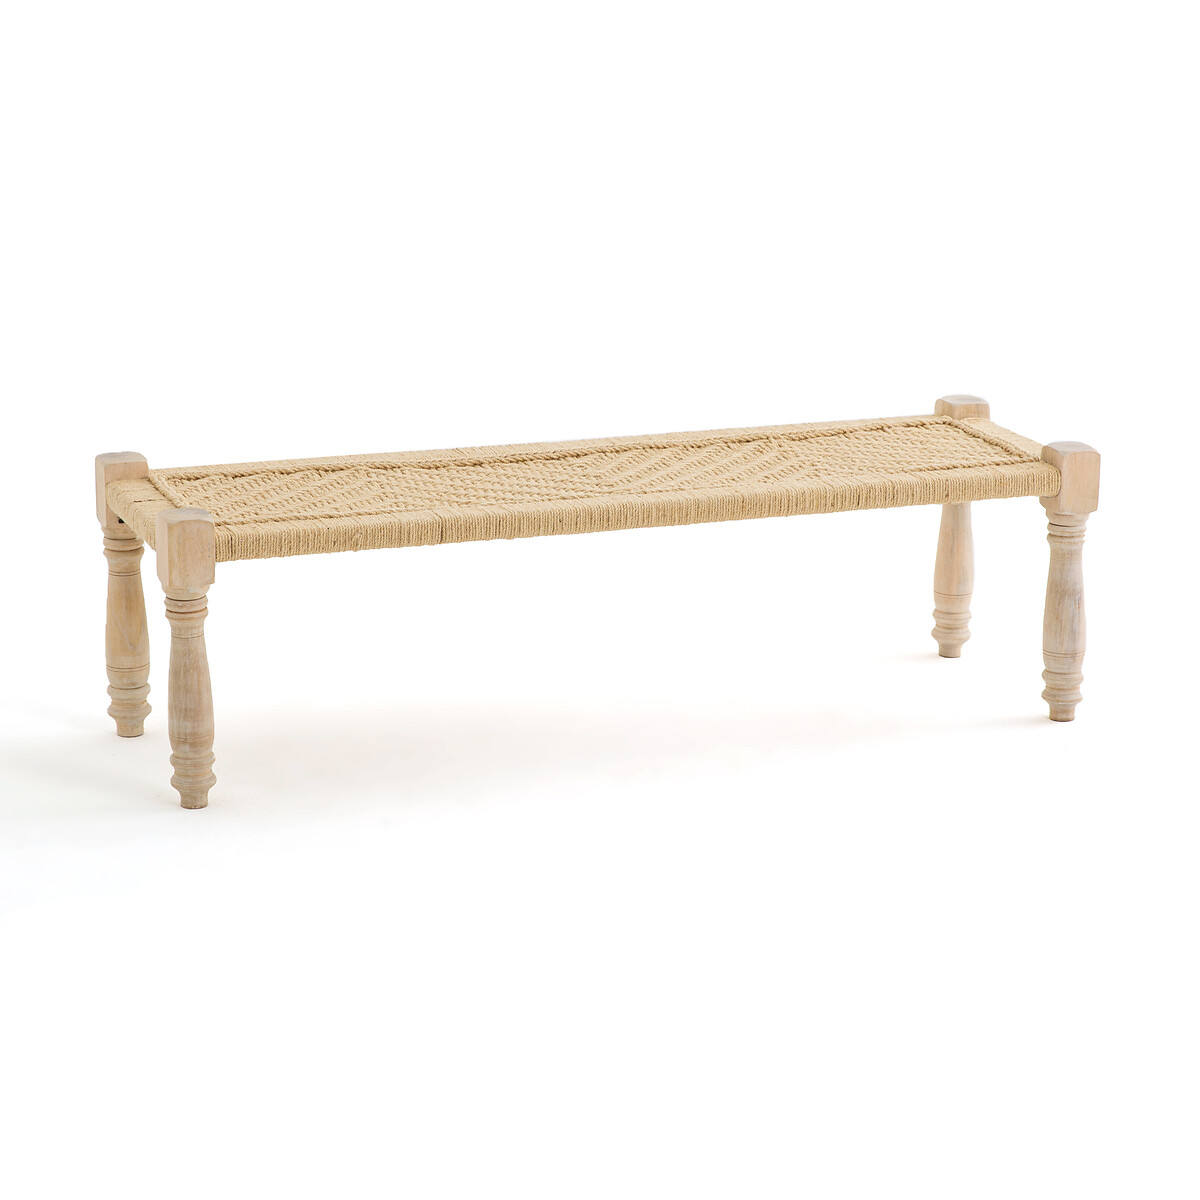 Adas Indian Style Bench in Mango Wood Rope